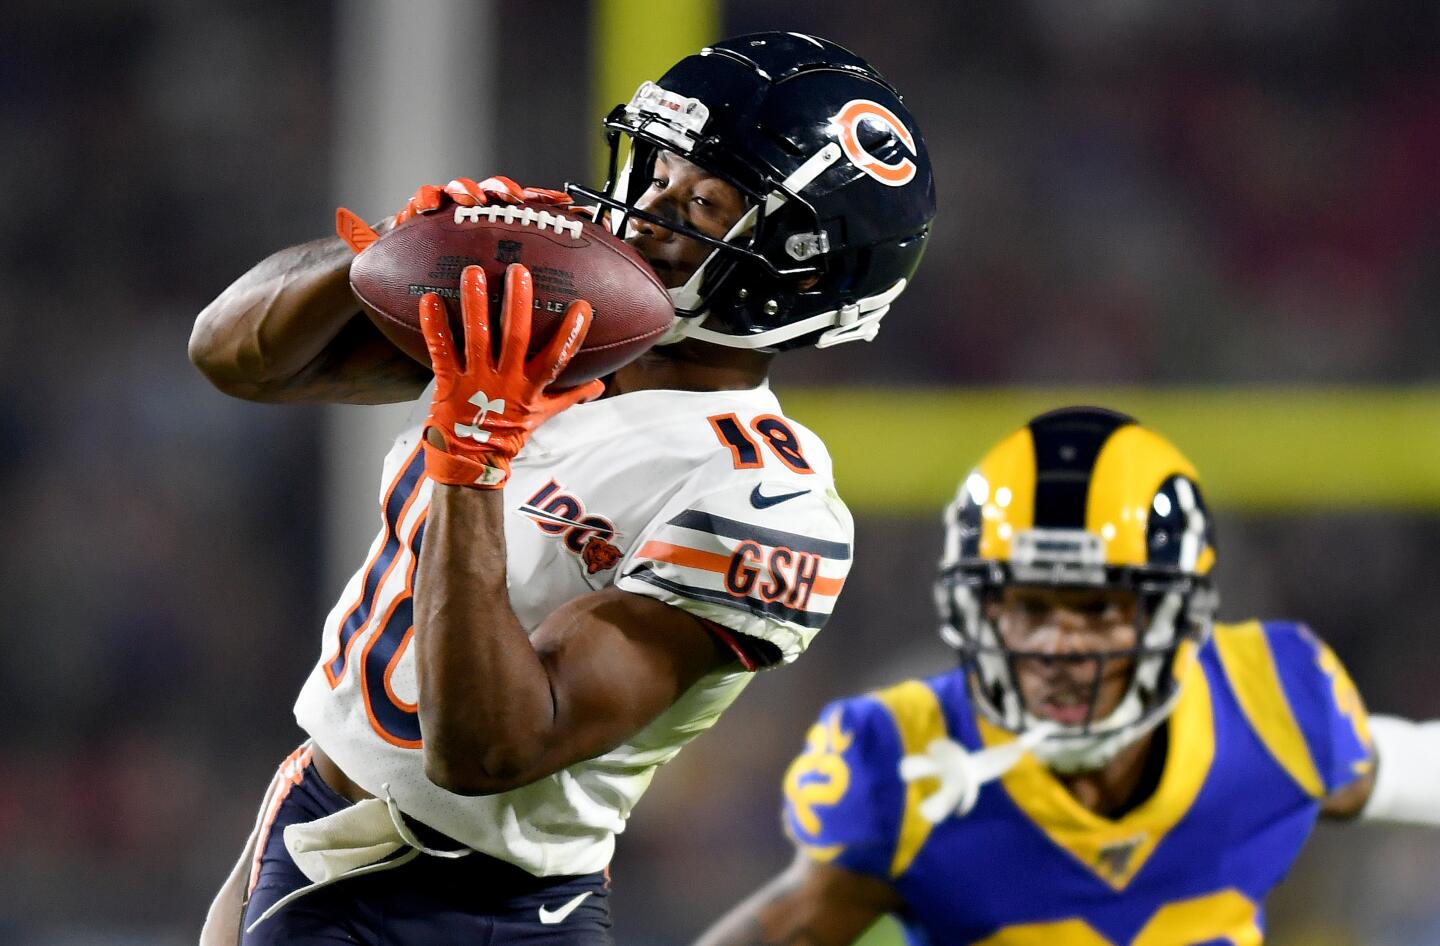 Bears wide receiver Taylor Gabriel makes a catch in front of Rams cornerback Troy Hill.